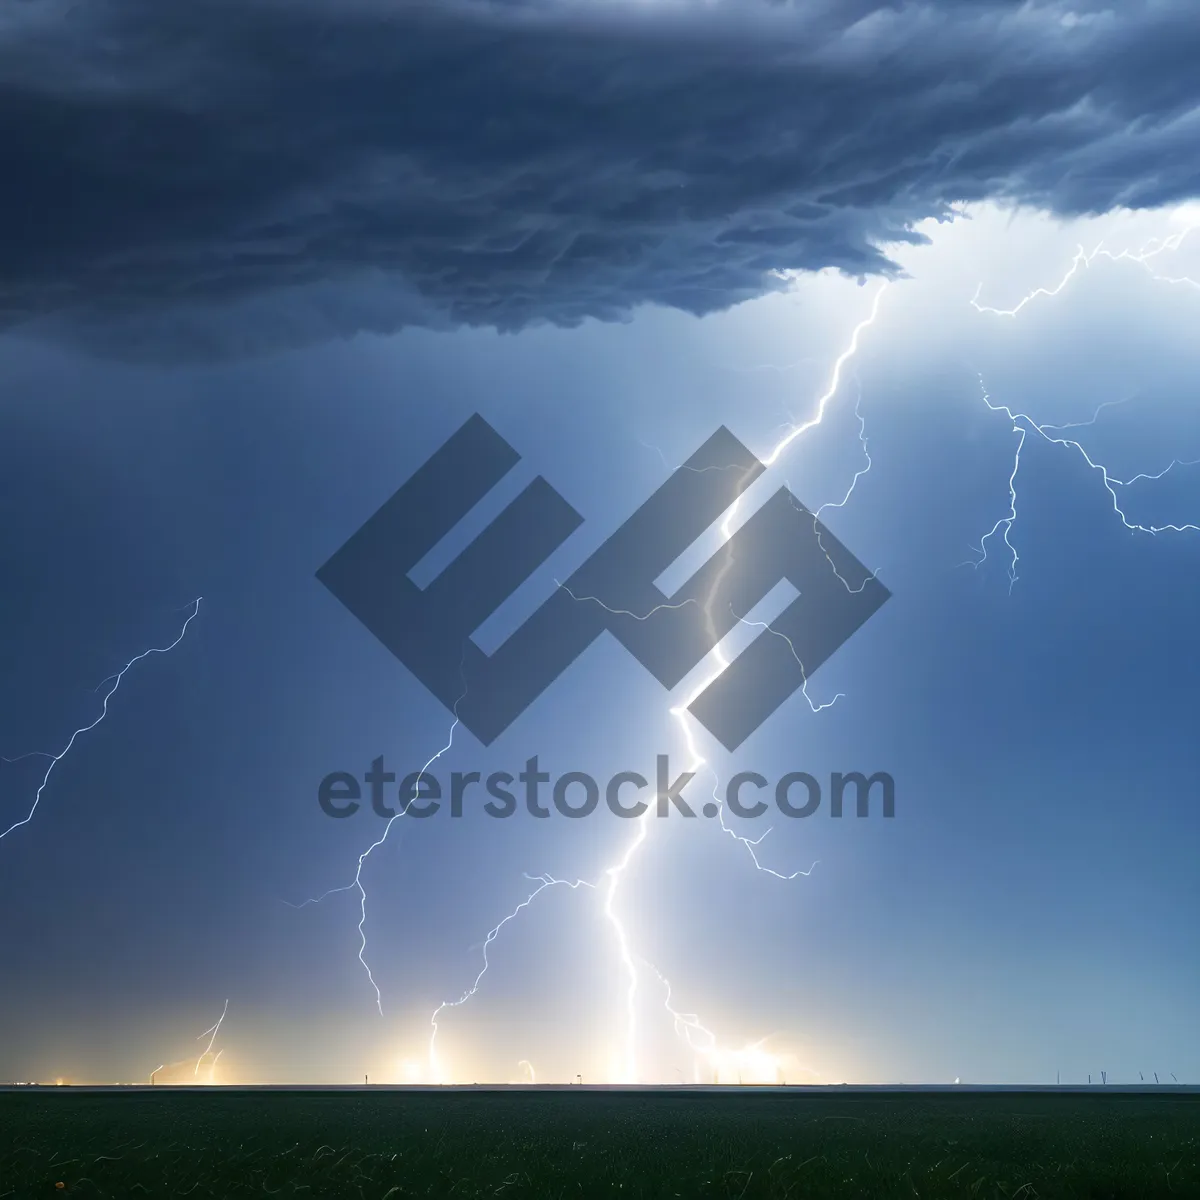 Picture of Dramatic Lightning Strikes in Stormy Sky